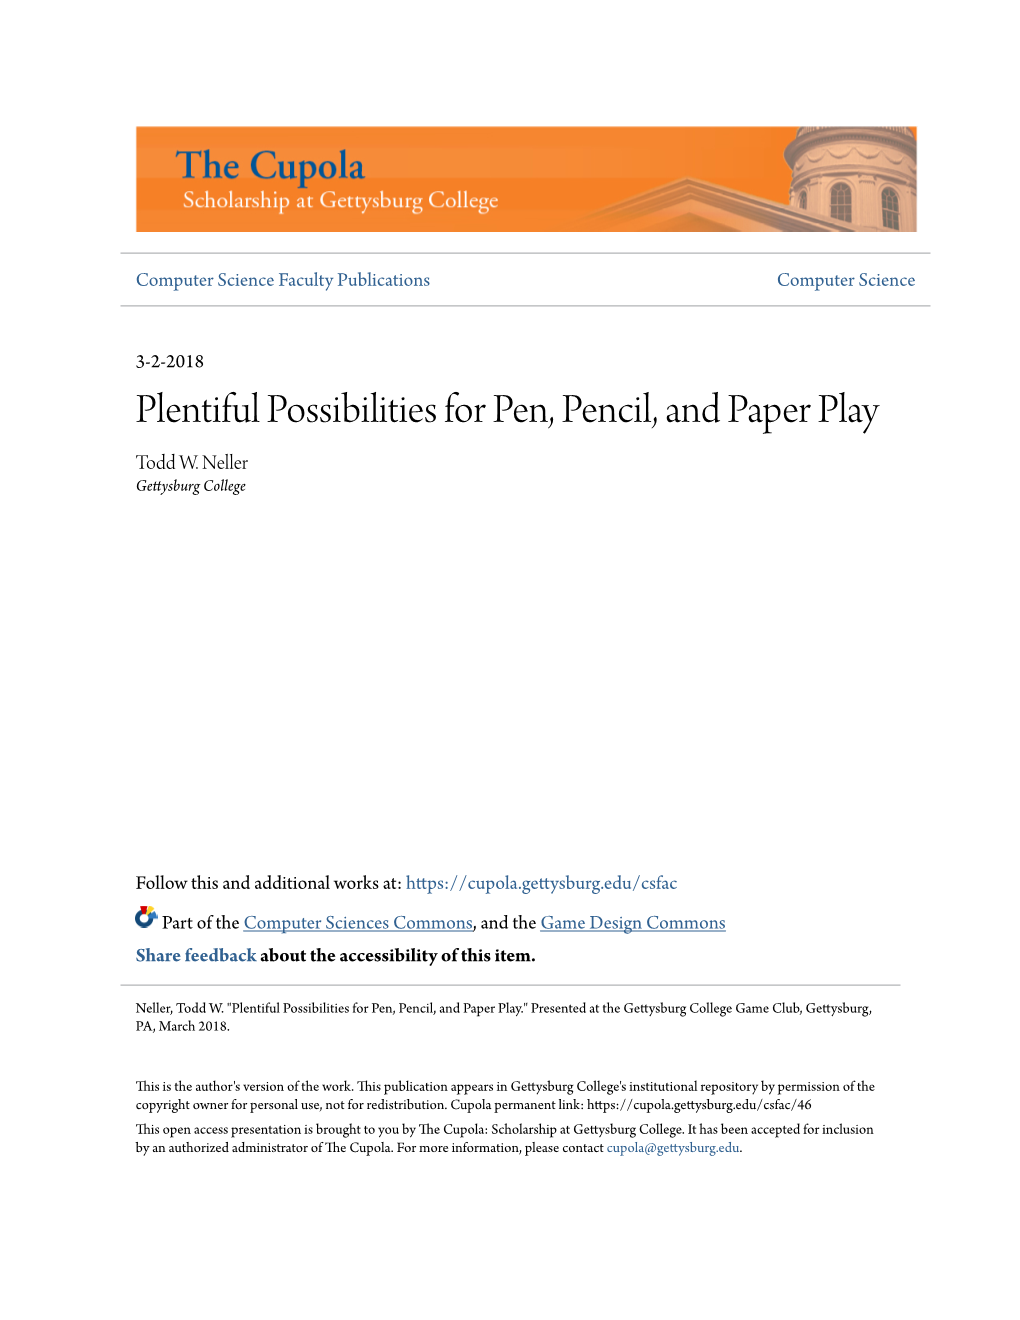 Plentiful Possibilities for Pen, Pencil, and Paper Play Todd W